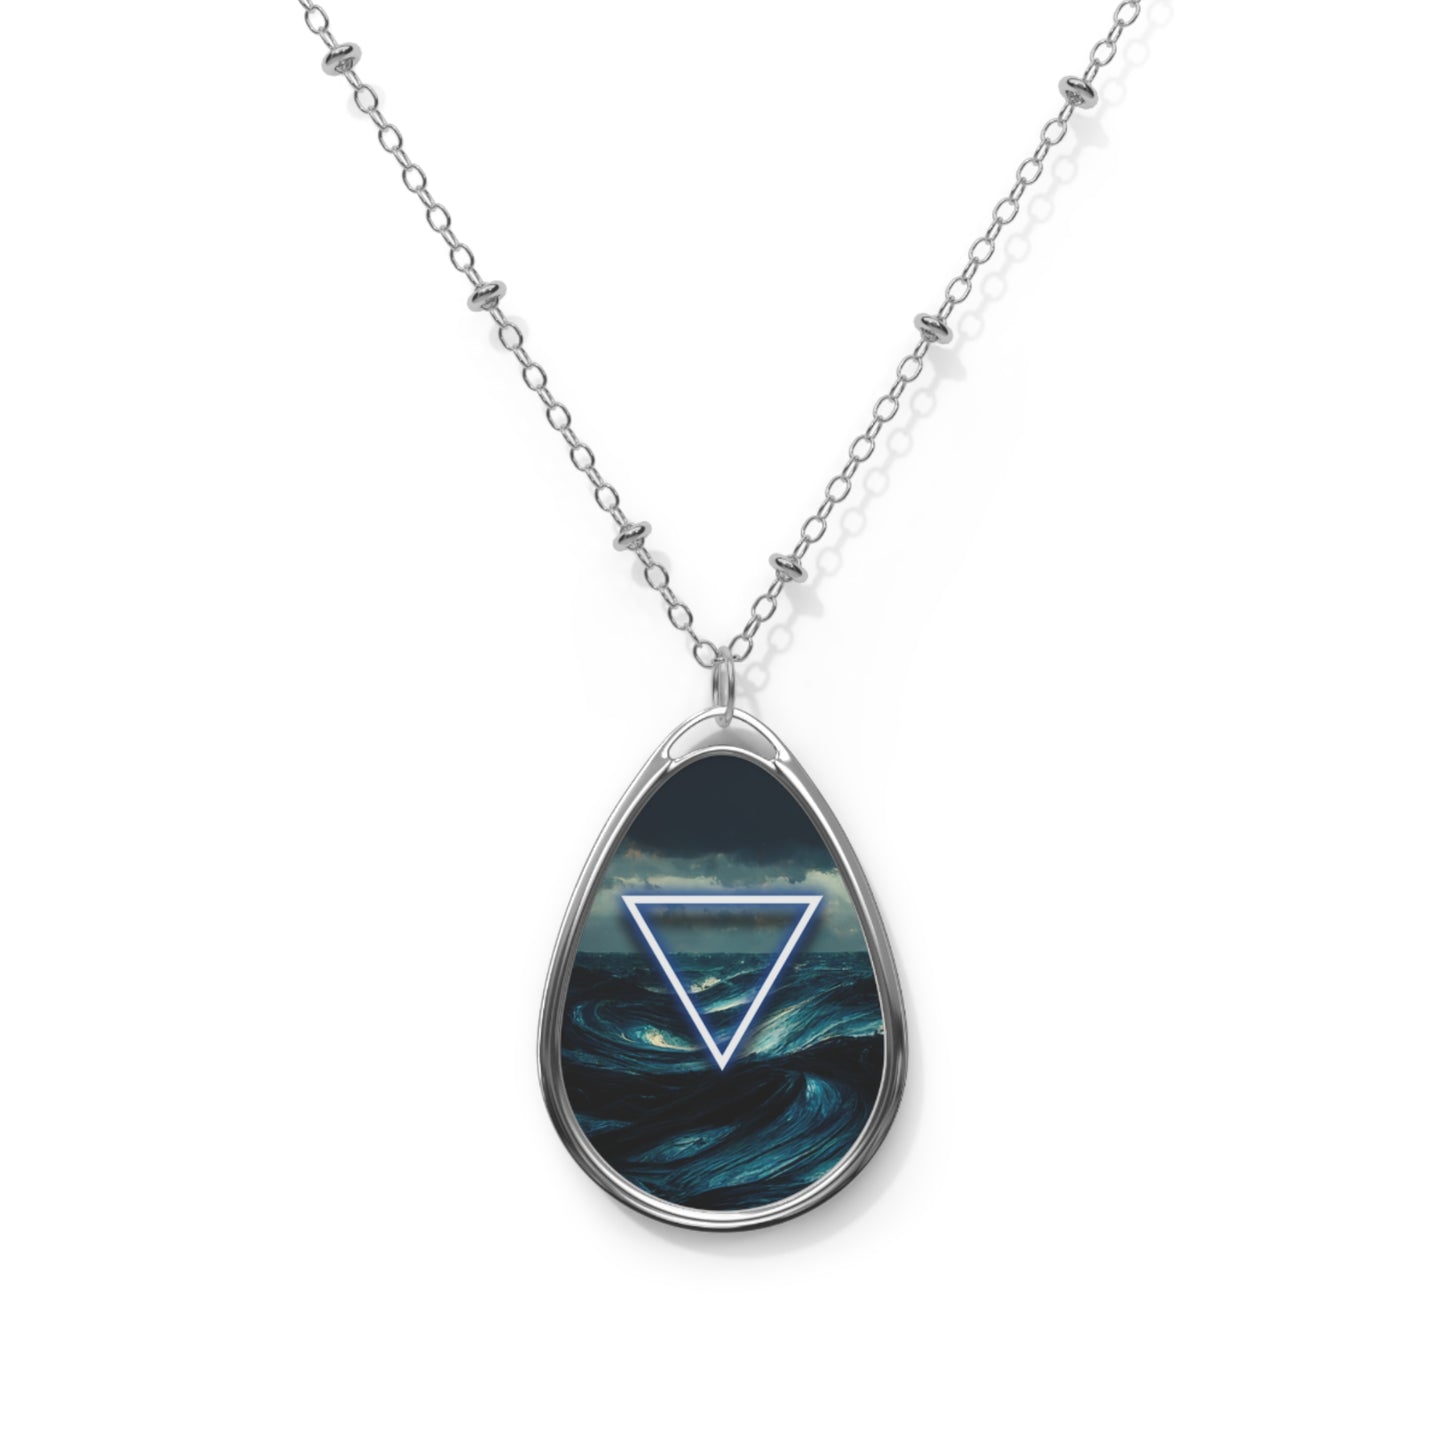 Water Symbol Necklace | Magical Jewelry | Occult Symbol of the Elements